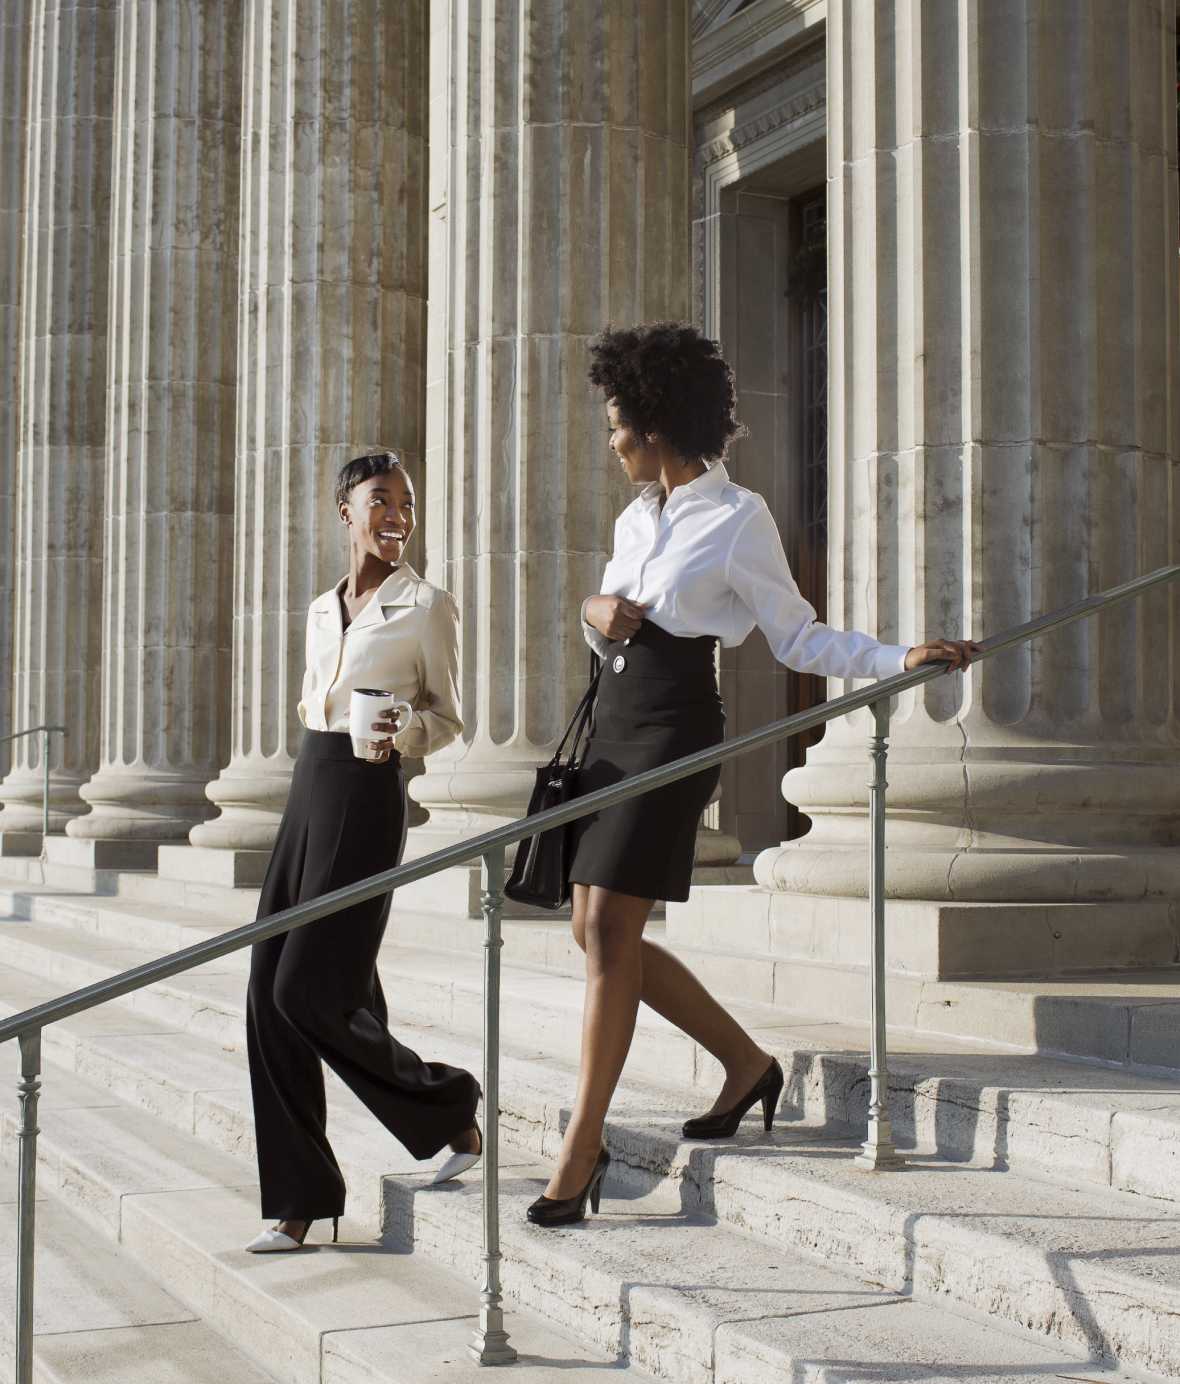 Two women in professional clothes, taking and smiling while walking down government building steps.